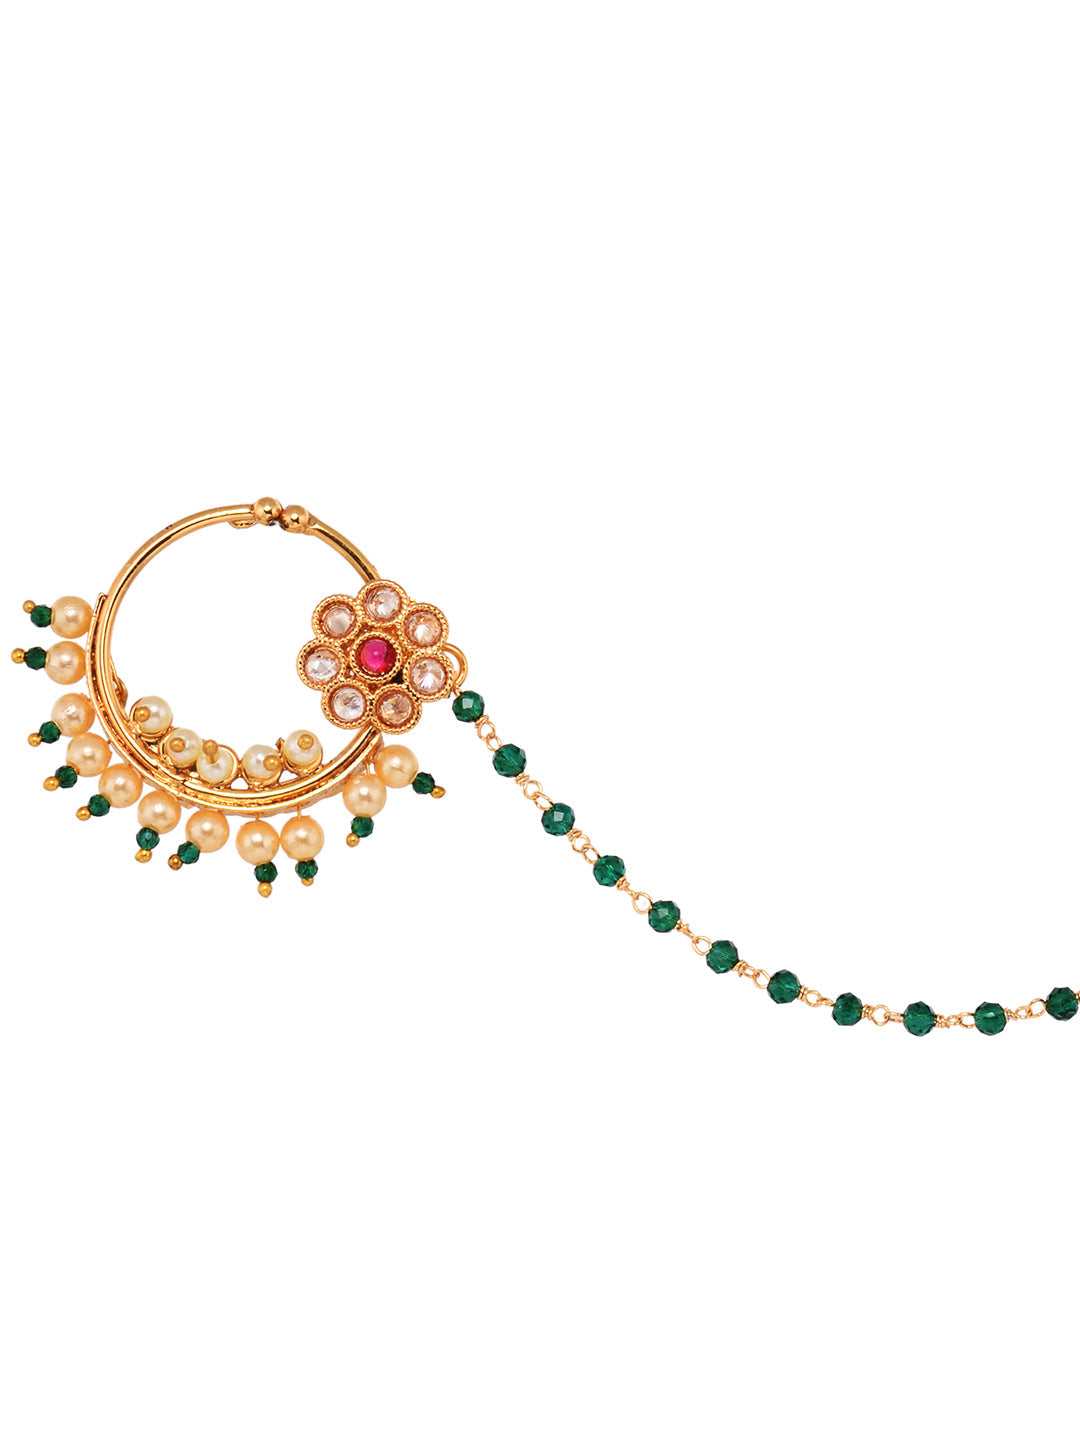 Gold Plated Studded & Beaded Floral Nose Ring Chain, zaveri pearls, sale price rs, sale price, sale gold plated, sale gold, sale, rubans, ring, regular price, priyassi jewellery, kushal's - S